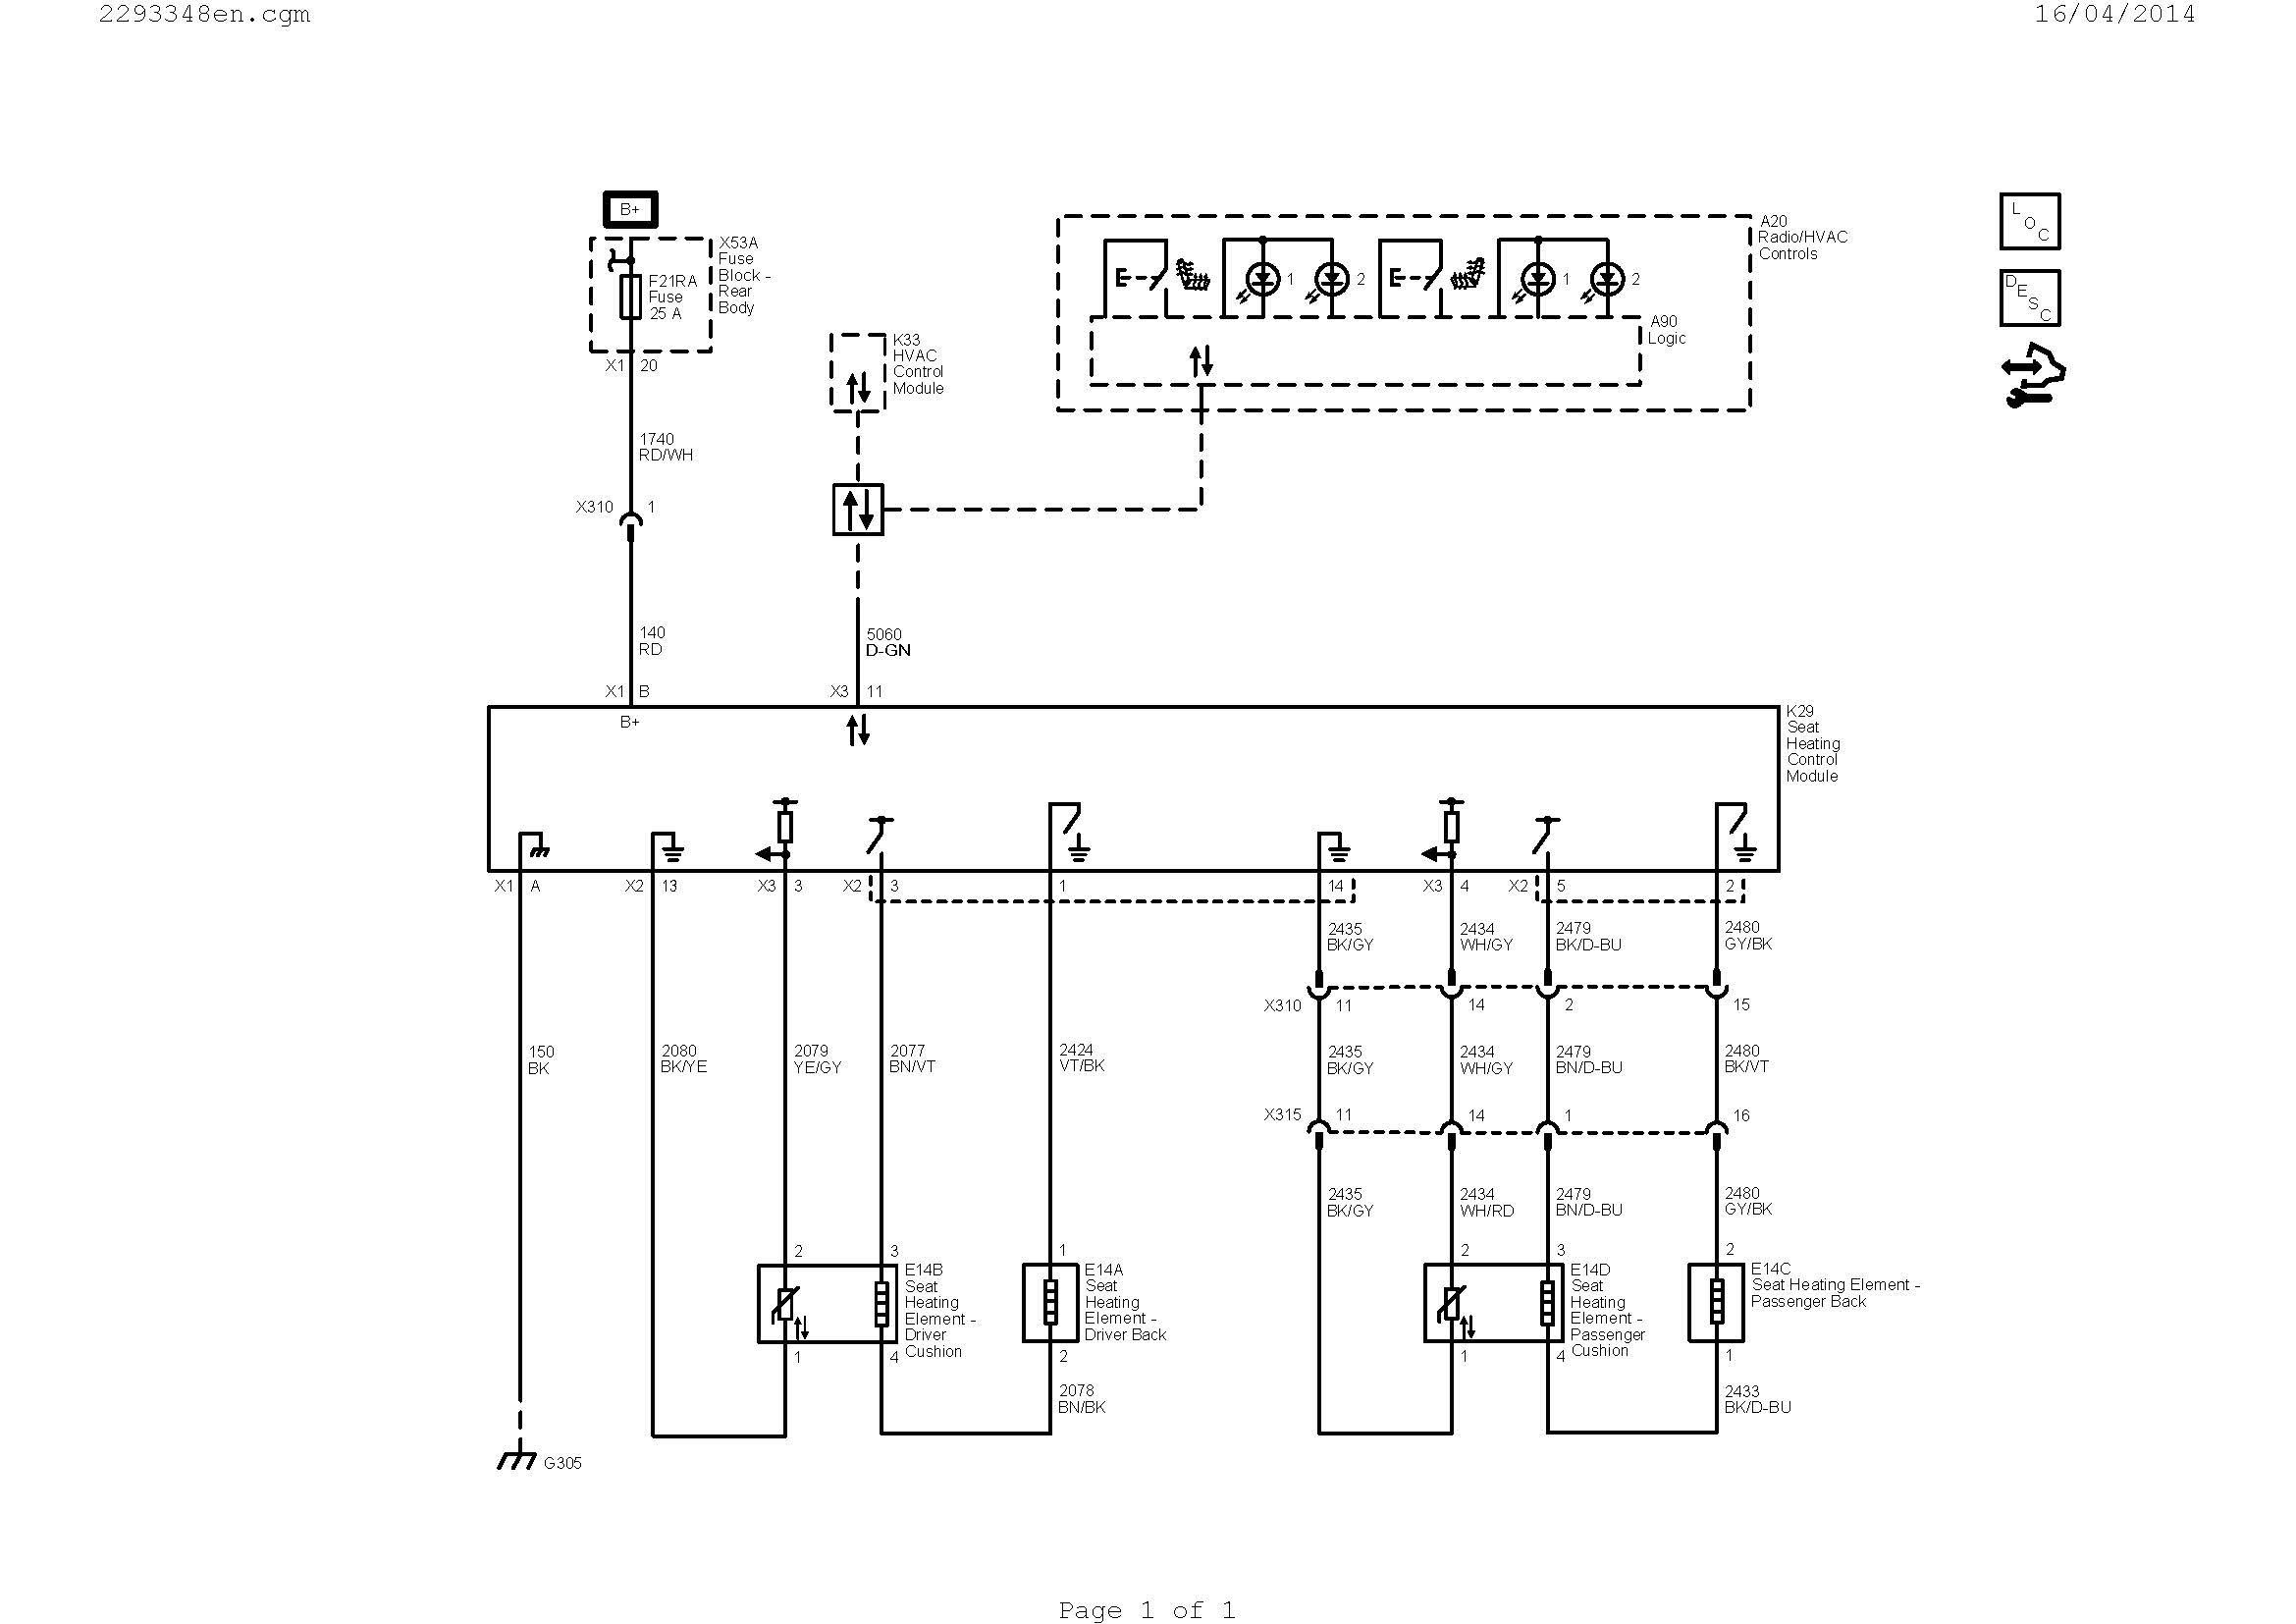 Wiring Diagram for A Relay Switch Save Wiring Diagram Ac Valid Hvac Switch Wiring Diagram